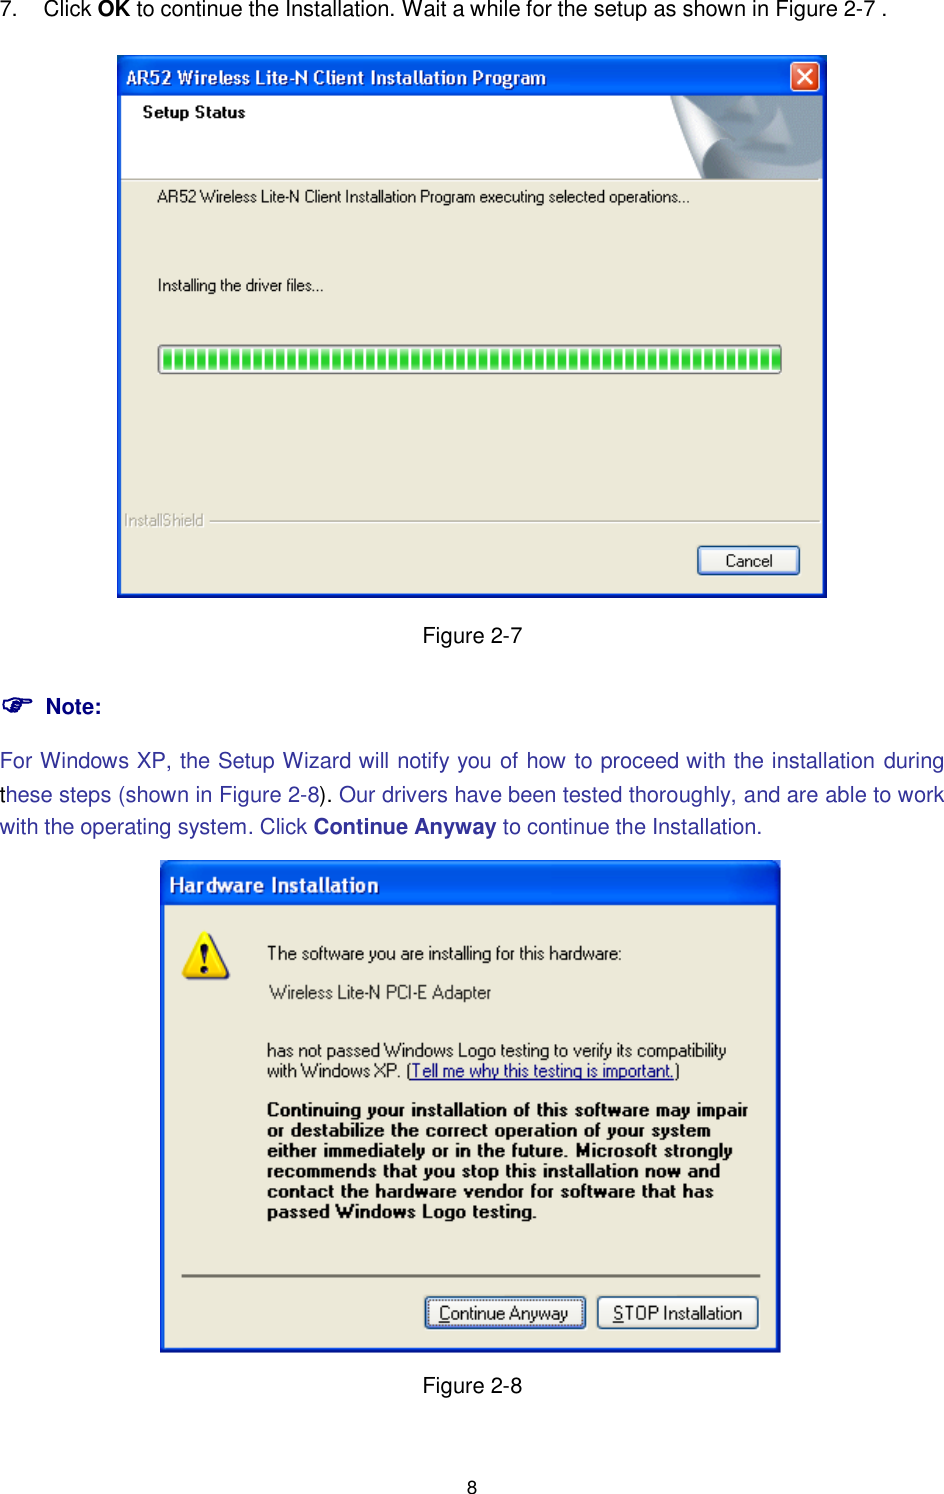  8 7.  Click OK to continue the Installation. Wait a while for the setup as shown in Figure 2-7 X.  Figure 2-7  Note: For Windows XP, the Setup Wizard will notify you of how to proceed with the installation  during these steps (shown in XFigure 2-8X). Our drivers have been tested thoroughly, and are able to work with the operating system. Click Continue Anyway to continue the Installation.  Figure 2-8 